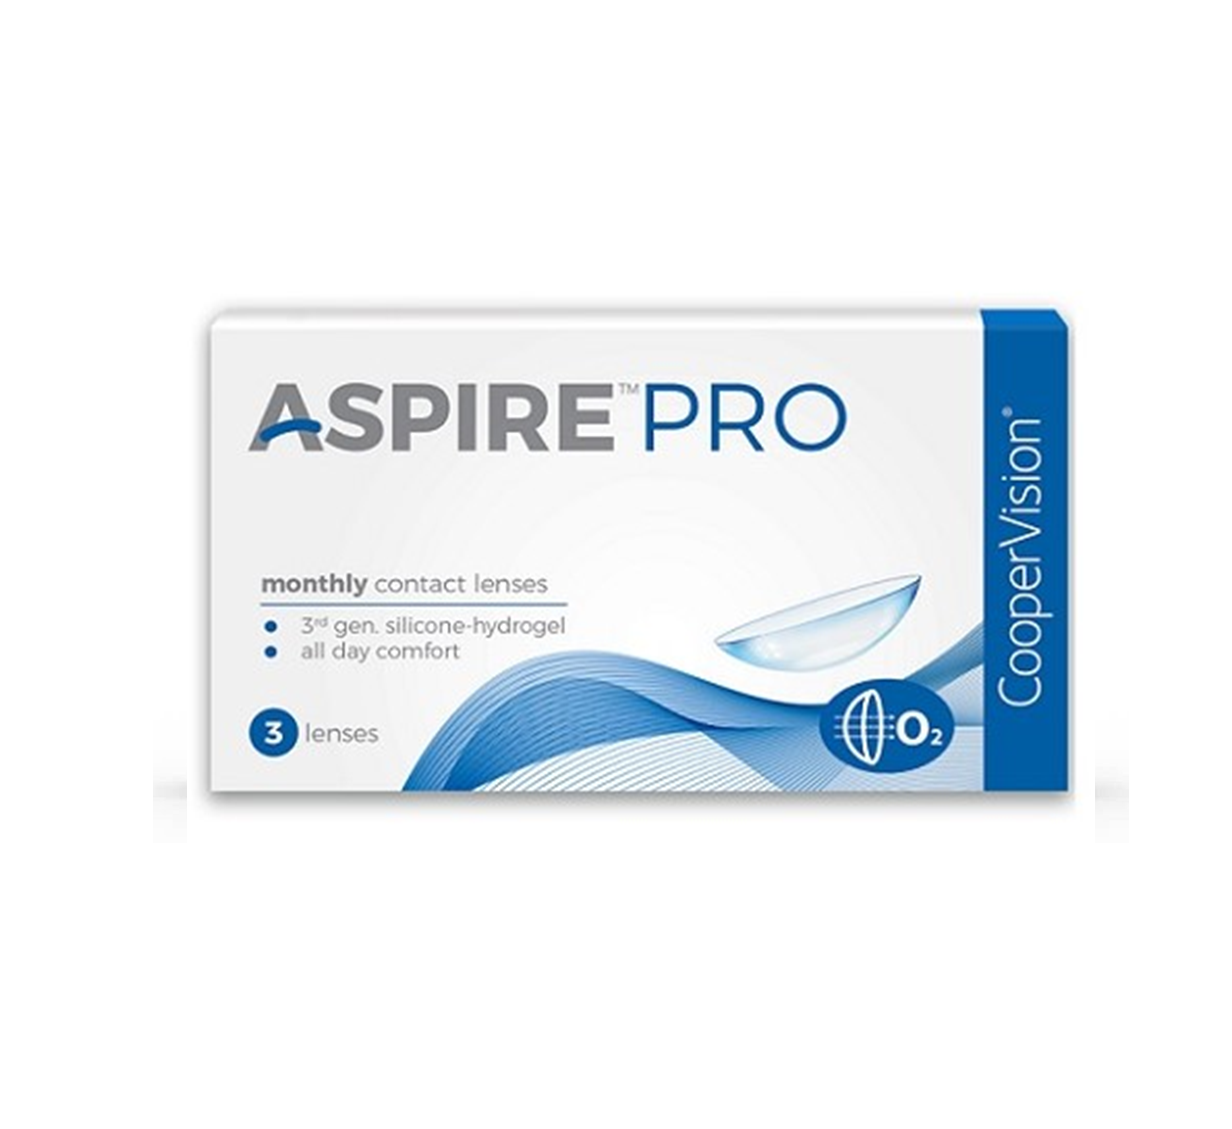 Aspire Pro Silicone Hydrogel Spherical Contact Lenses (3 lenses box)